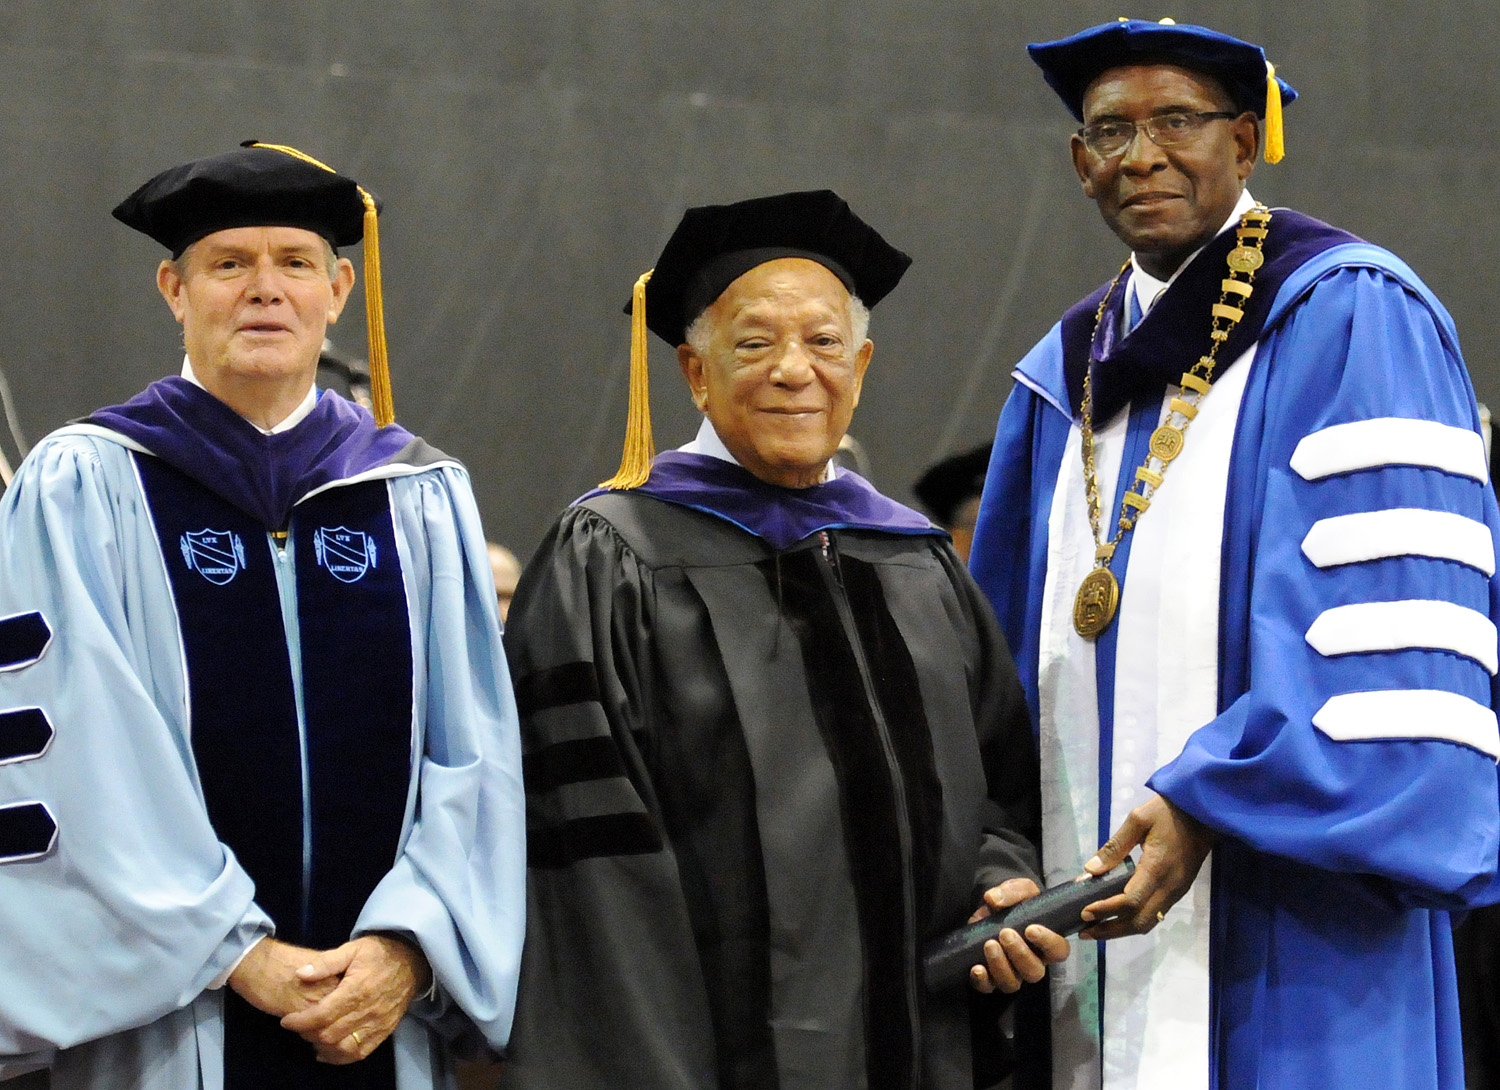 Ambassador Terence A. Todman, center, receives an Honorary Doctorate of Law degree during UVI 2013 Commencement  Ceremony from UVI President Dr. David Hall, right, and Attorney Henry C. Smock, who is now chair of the UVI Board of Trustees.